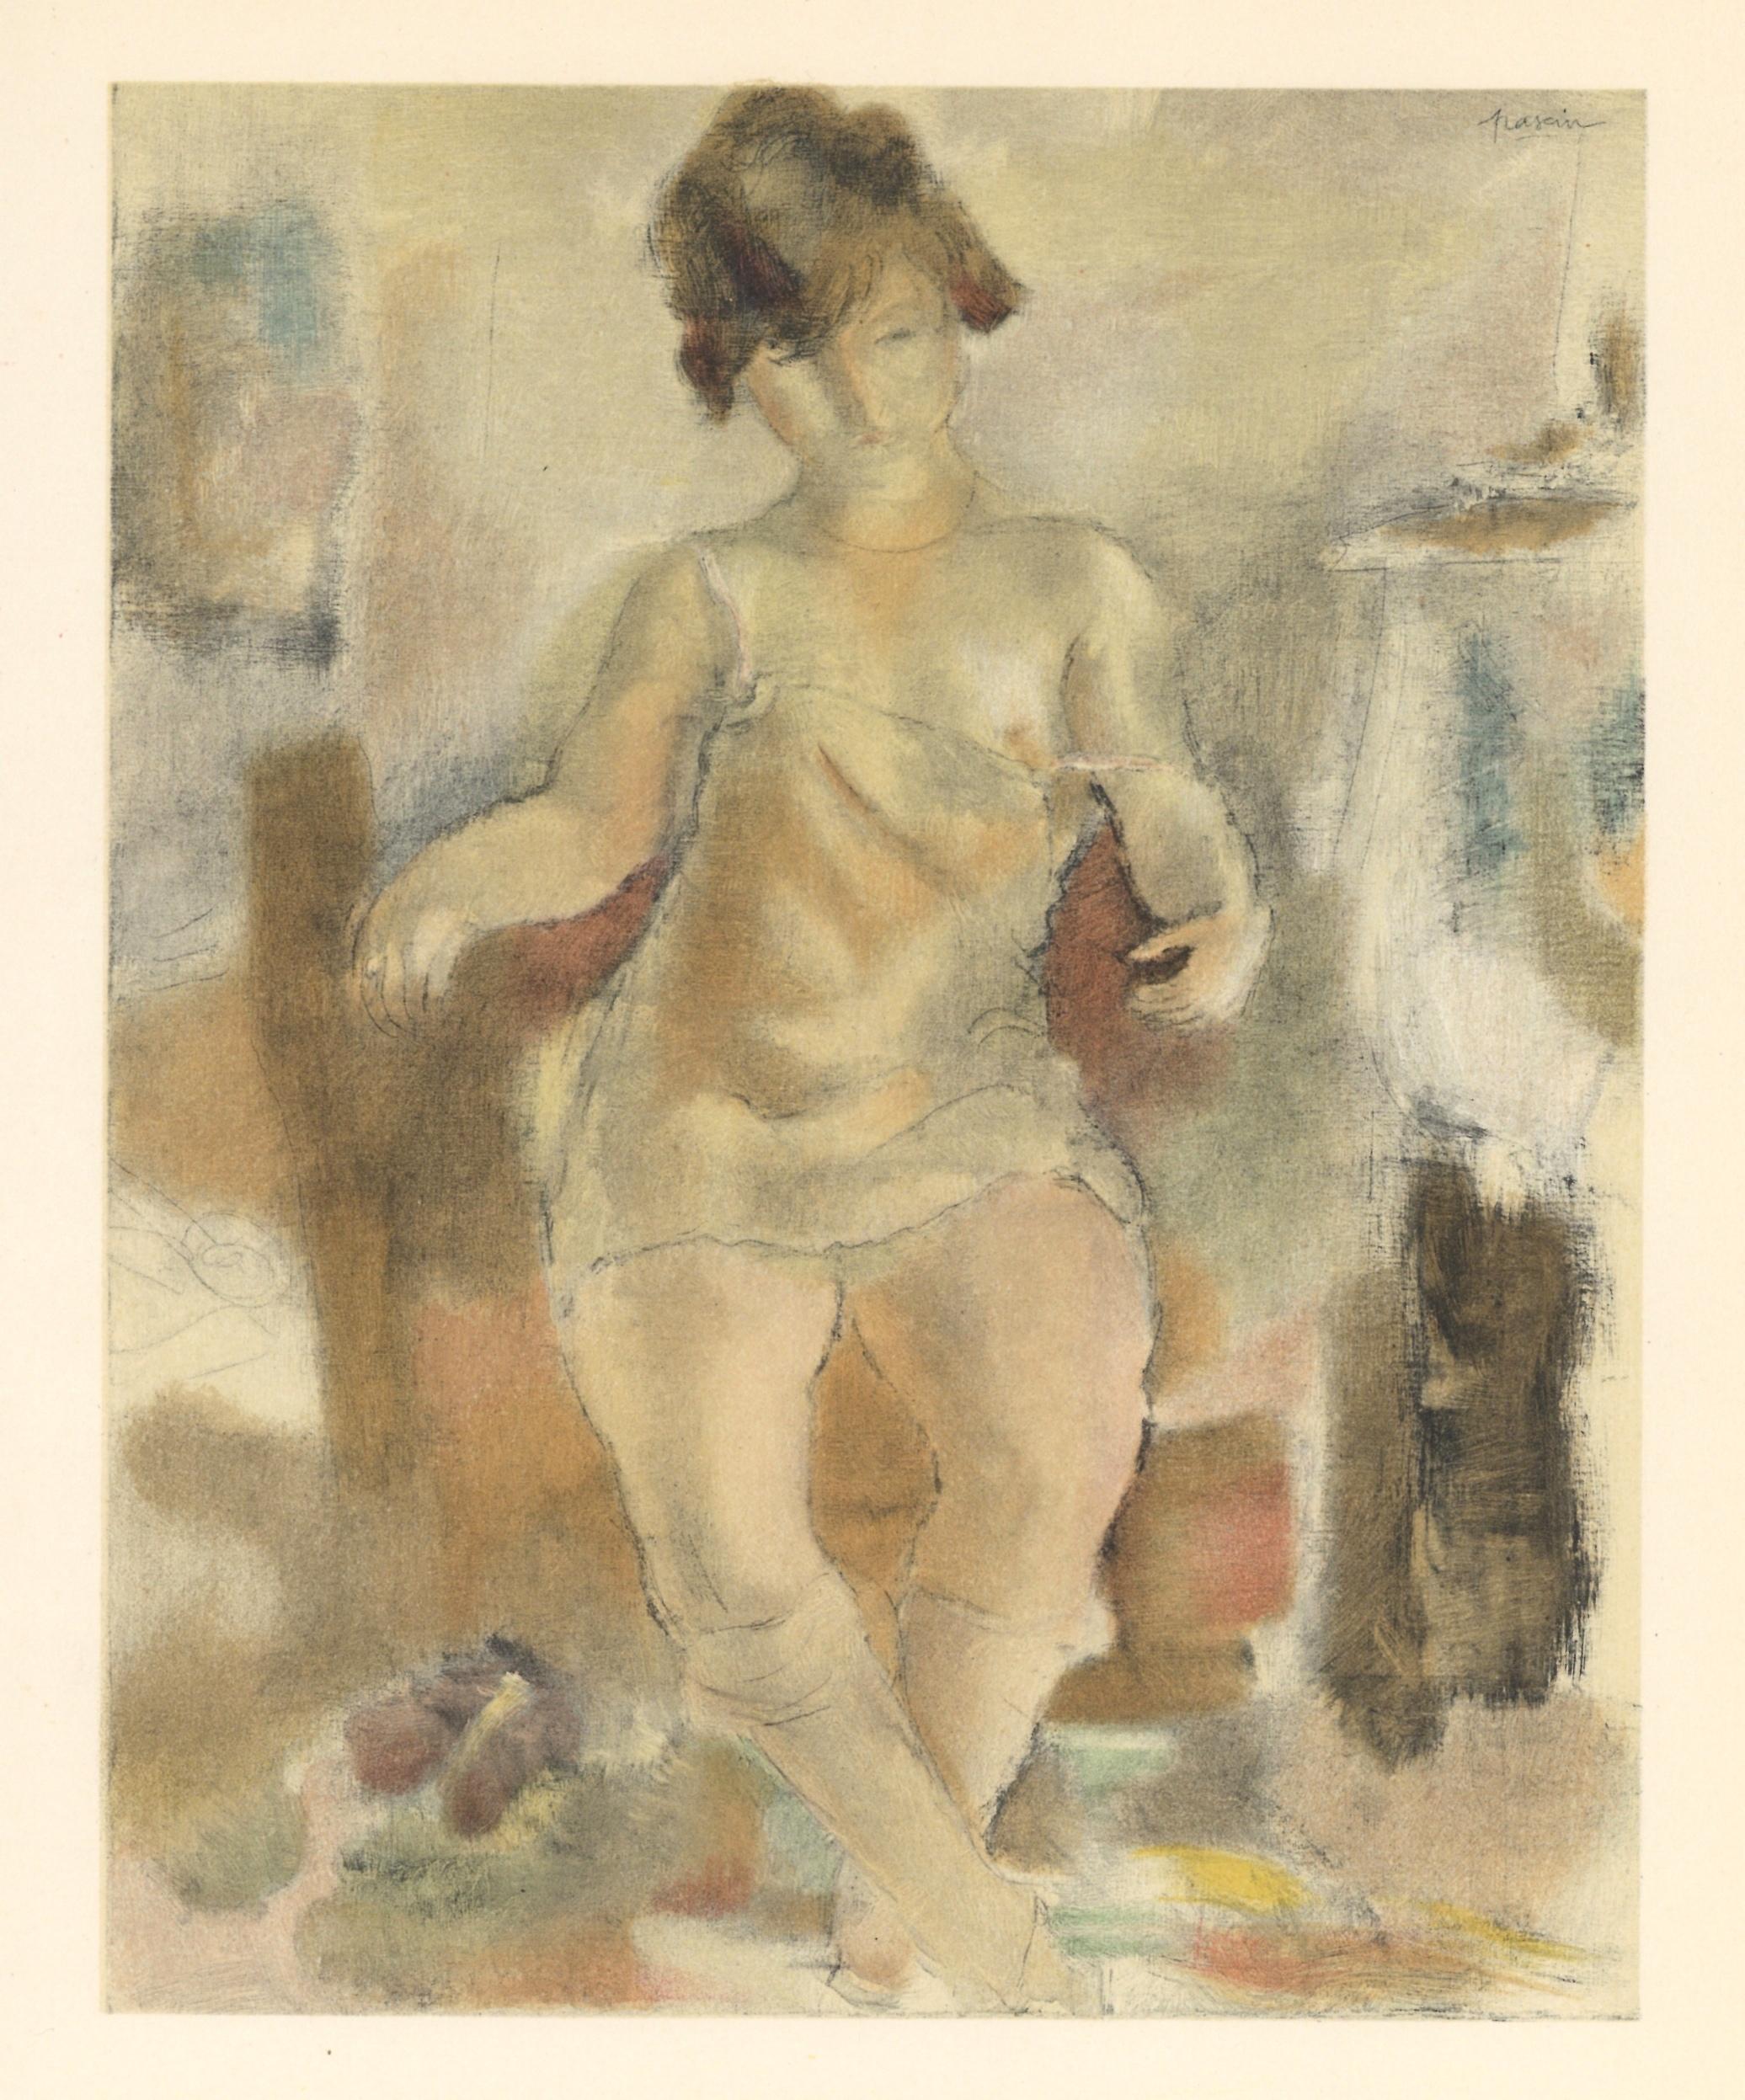 Medium: lithograph (after the painting). Printed in Paris in 1954 at the atelier of Mourlot Frères in an edition of 2000. Sheet size: 12 1/4 x 9 1/2 inches (315 x 245 mm). Signed in the plate (not hand-signed).